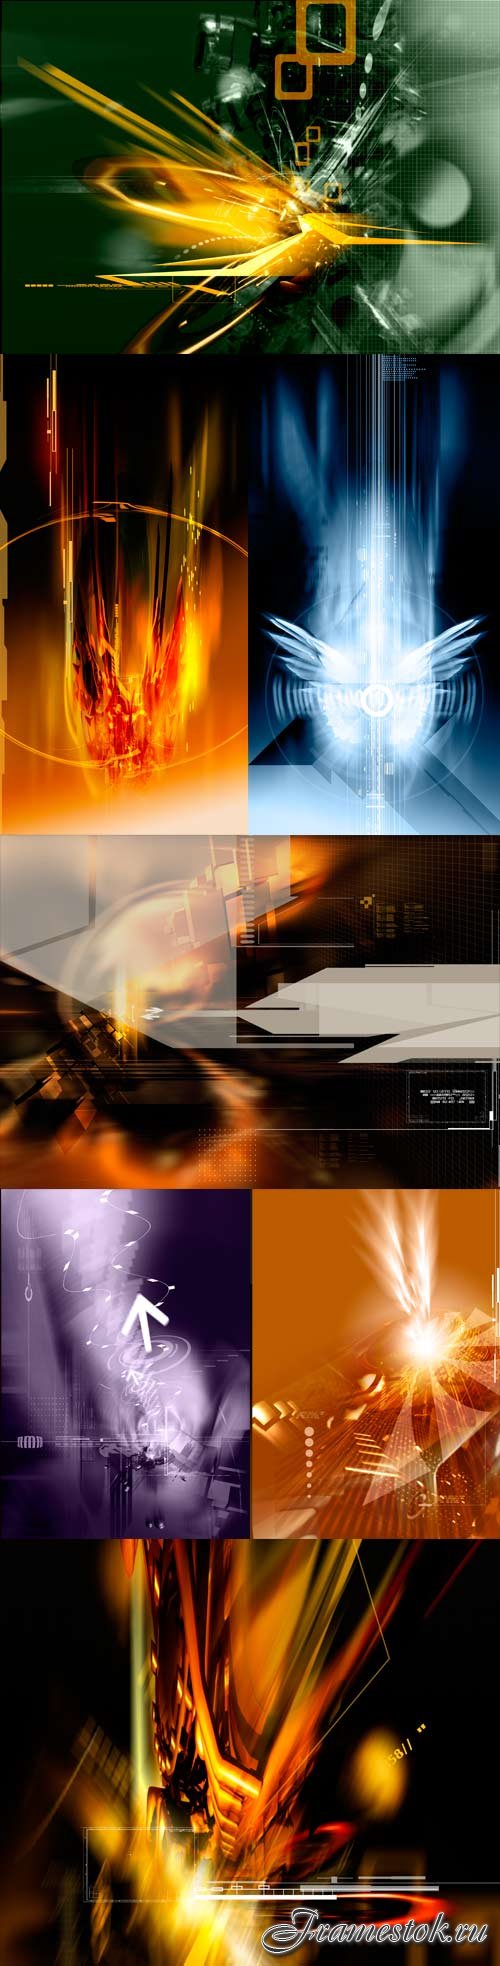 Multifokus abstract backgrounds PSD - 2